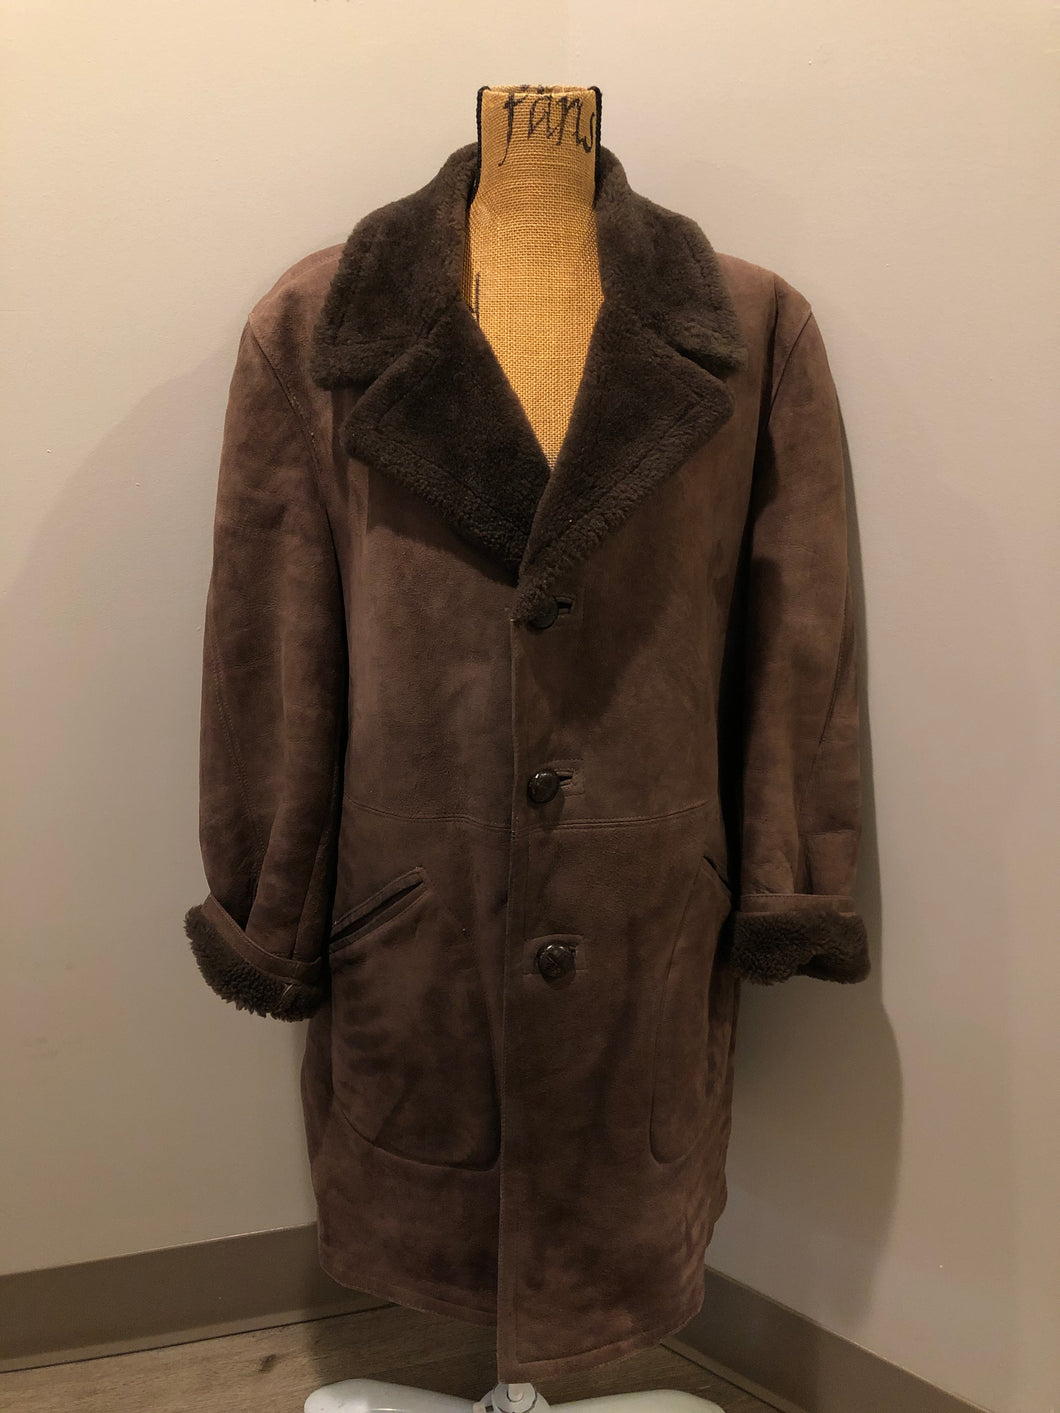 Kingspier Vintage - Bovet medium brown shearling coat. This coat features shearling trim and lining, wooden button closures and patch pockets.